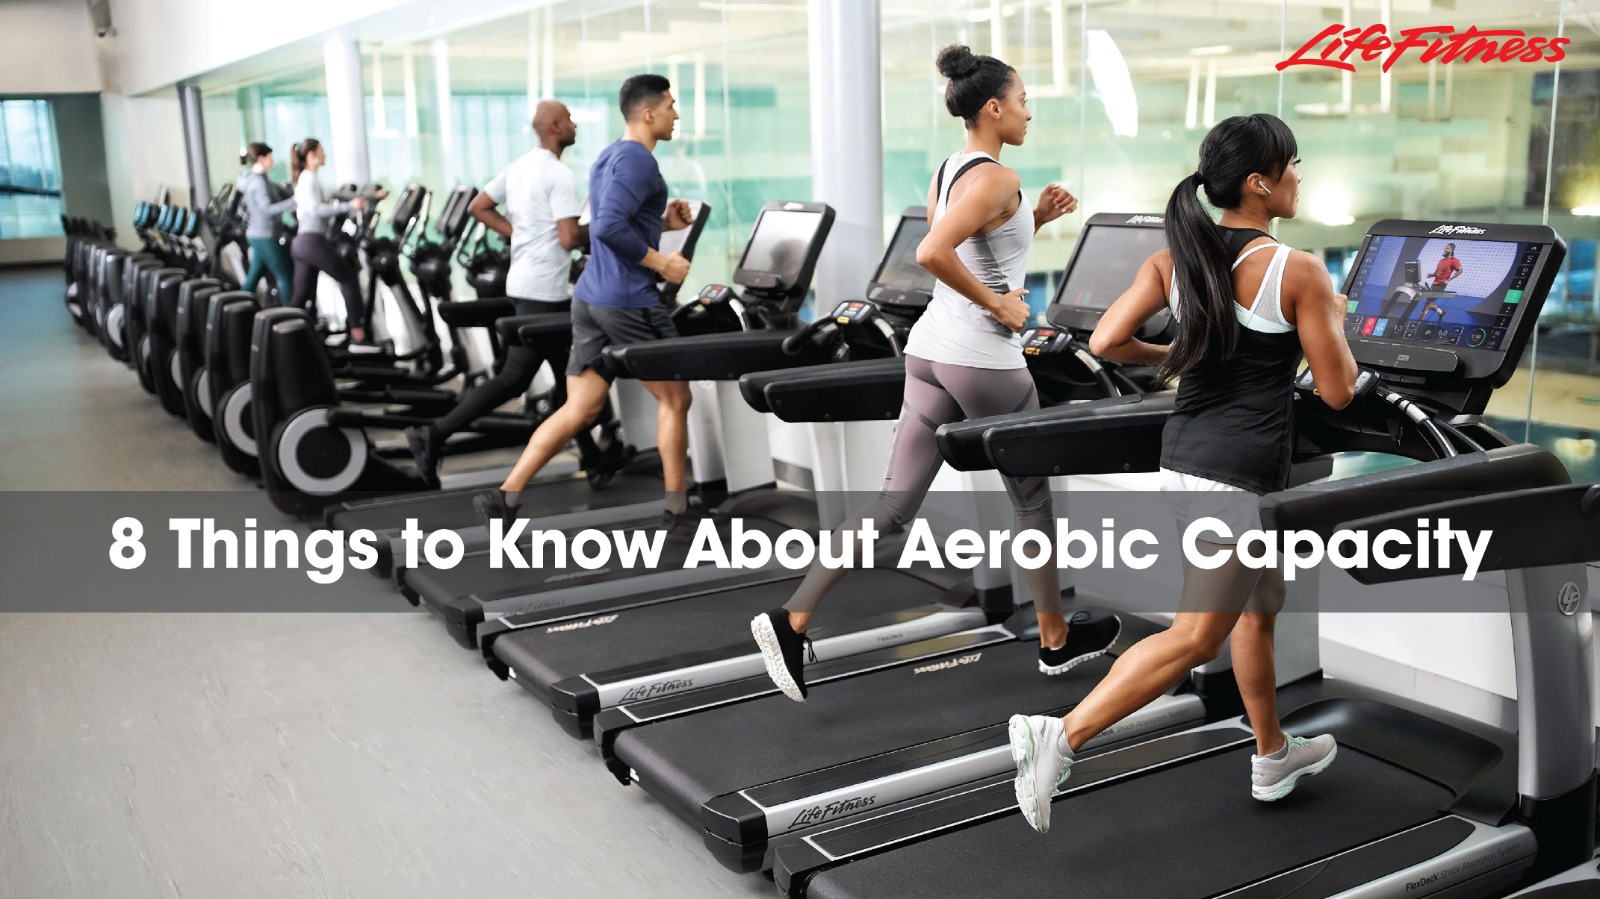 8 Things to Know About Aerobic Capacity